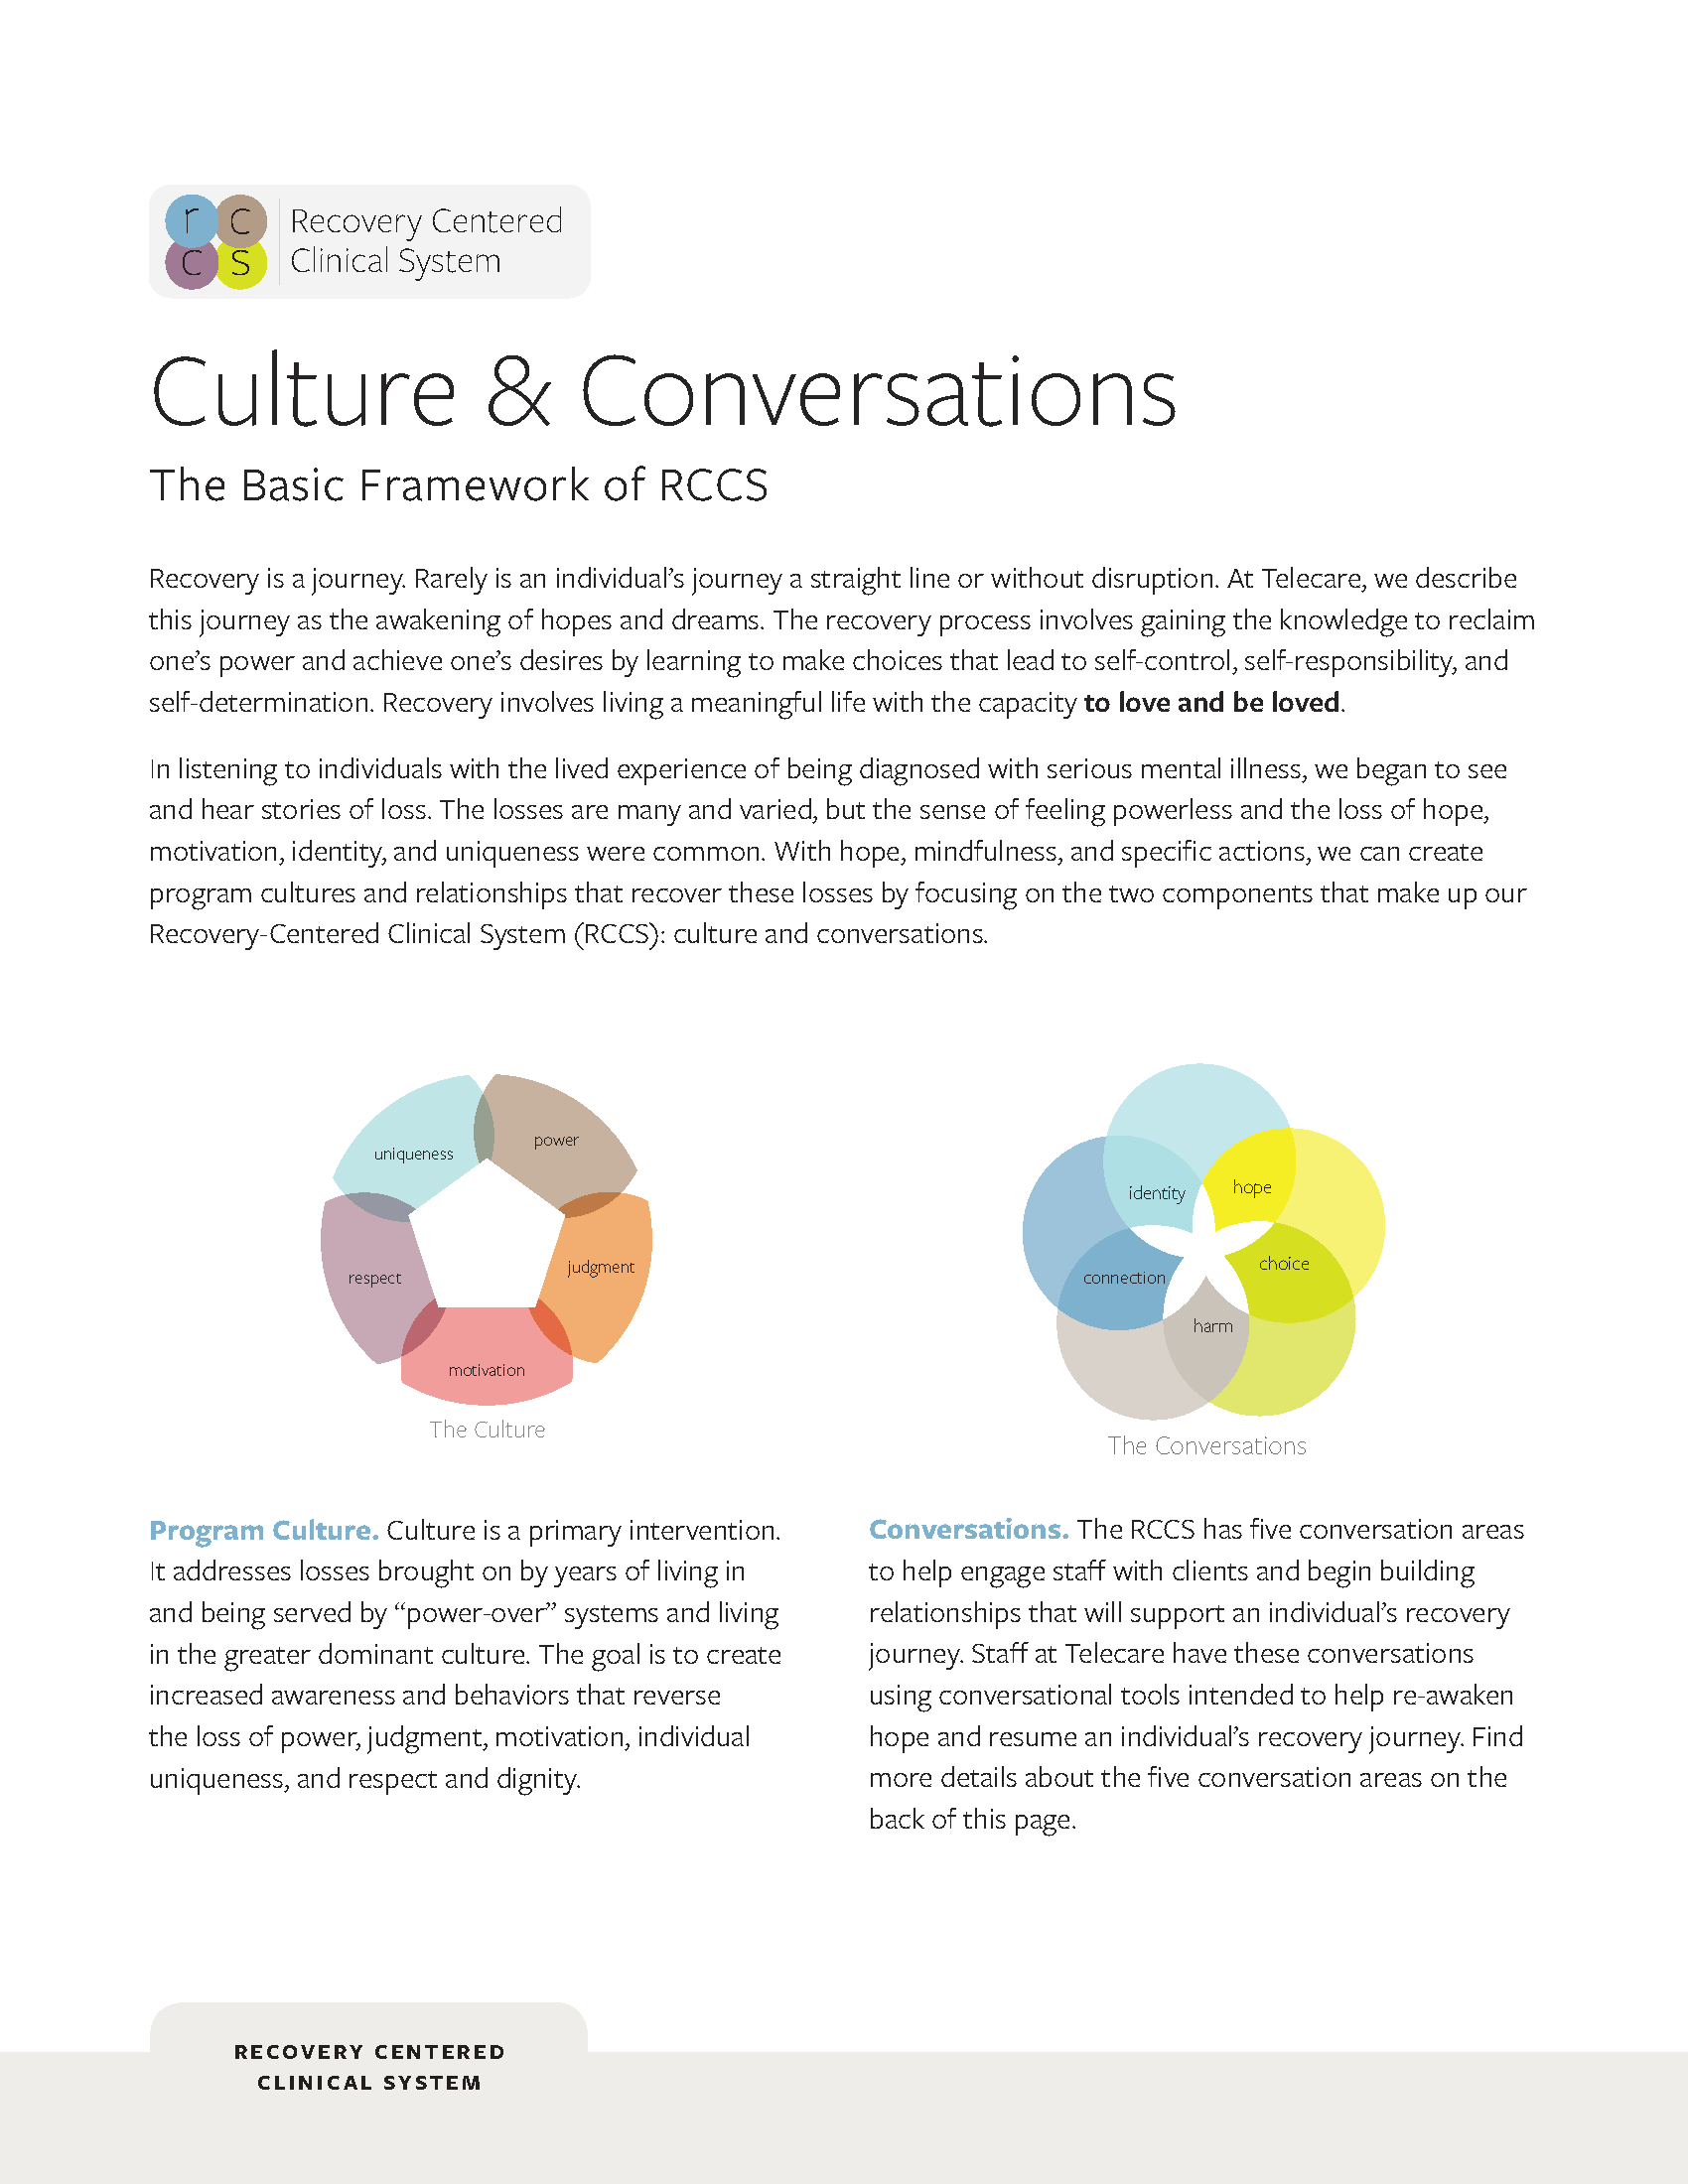 2017_03_RCCS_Culture and Conversations Framework_Page_1.png